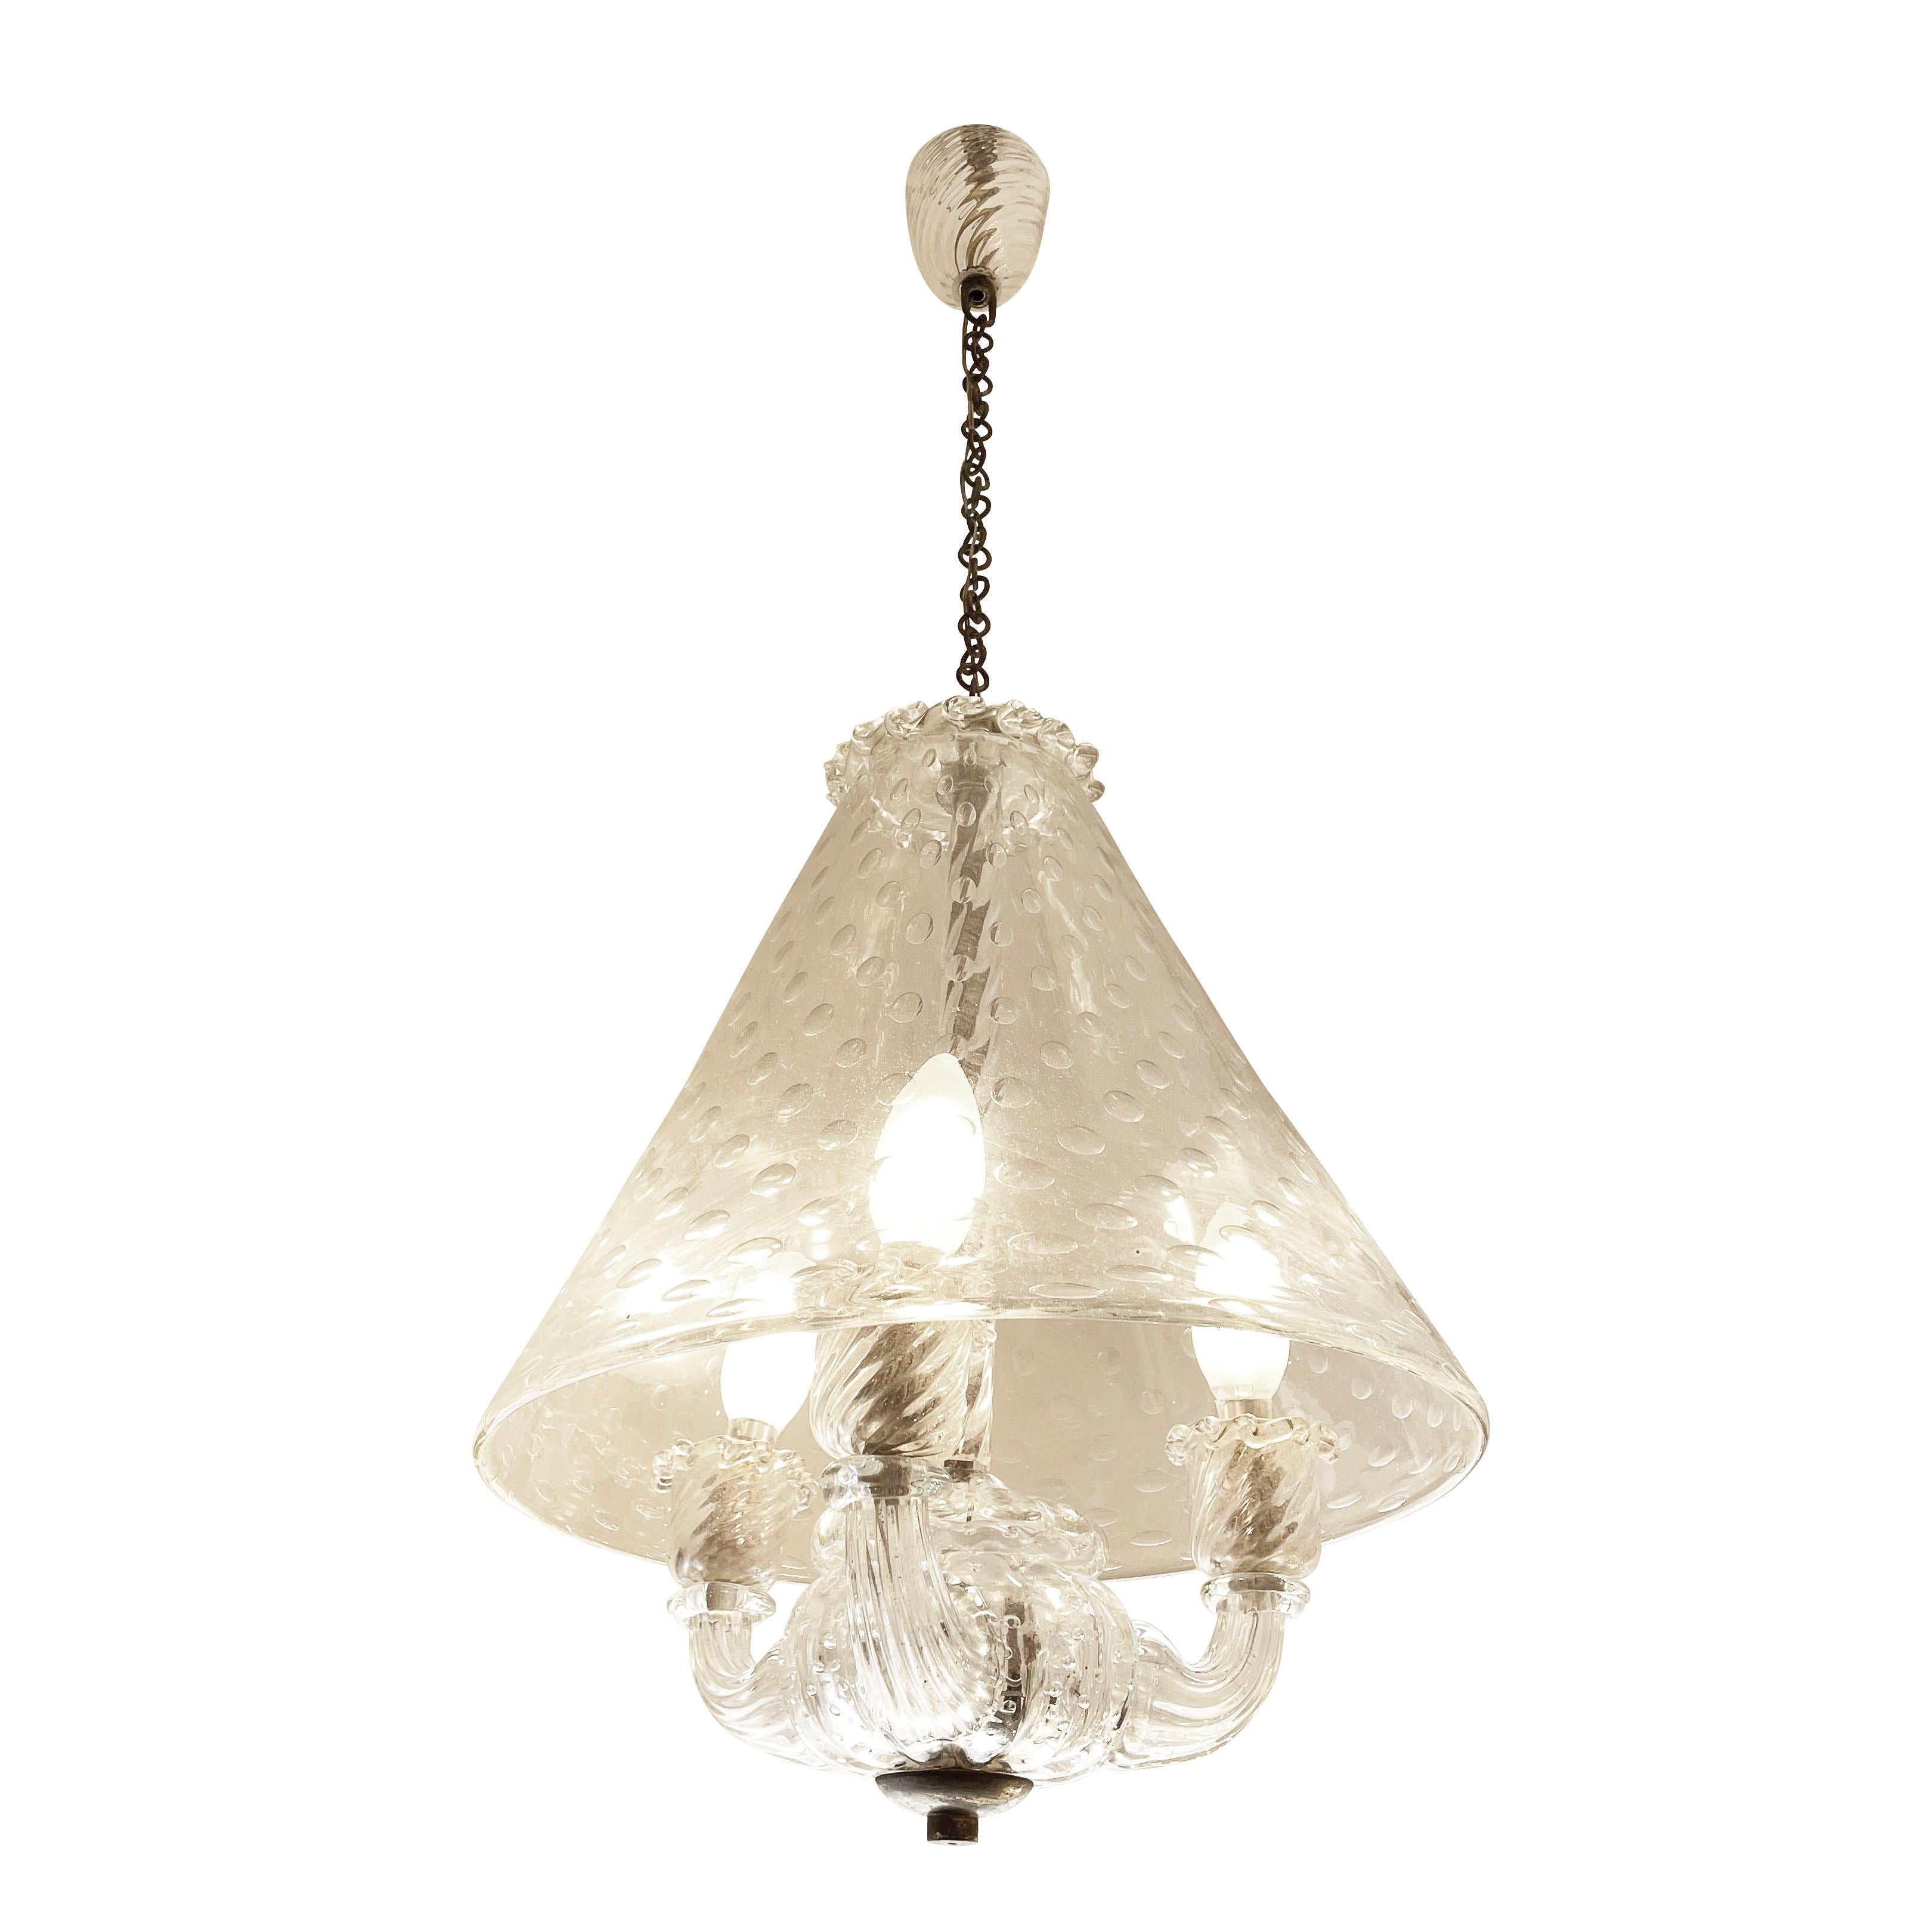 1940’s Murano glass pendant by Barovier featuring a conical glass dome with infused bubbles. Below the dome are three glass arms each holding a candelabra bulb. Mounted on its original chain and terminating with a glass canopy. Height of chain can